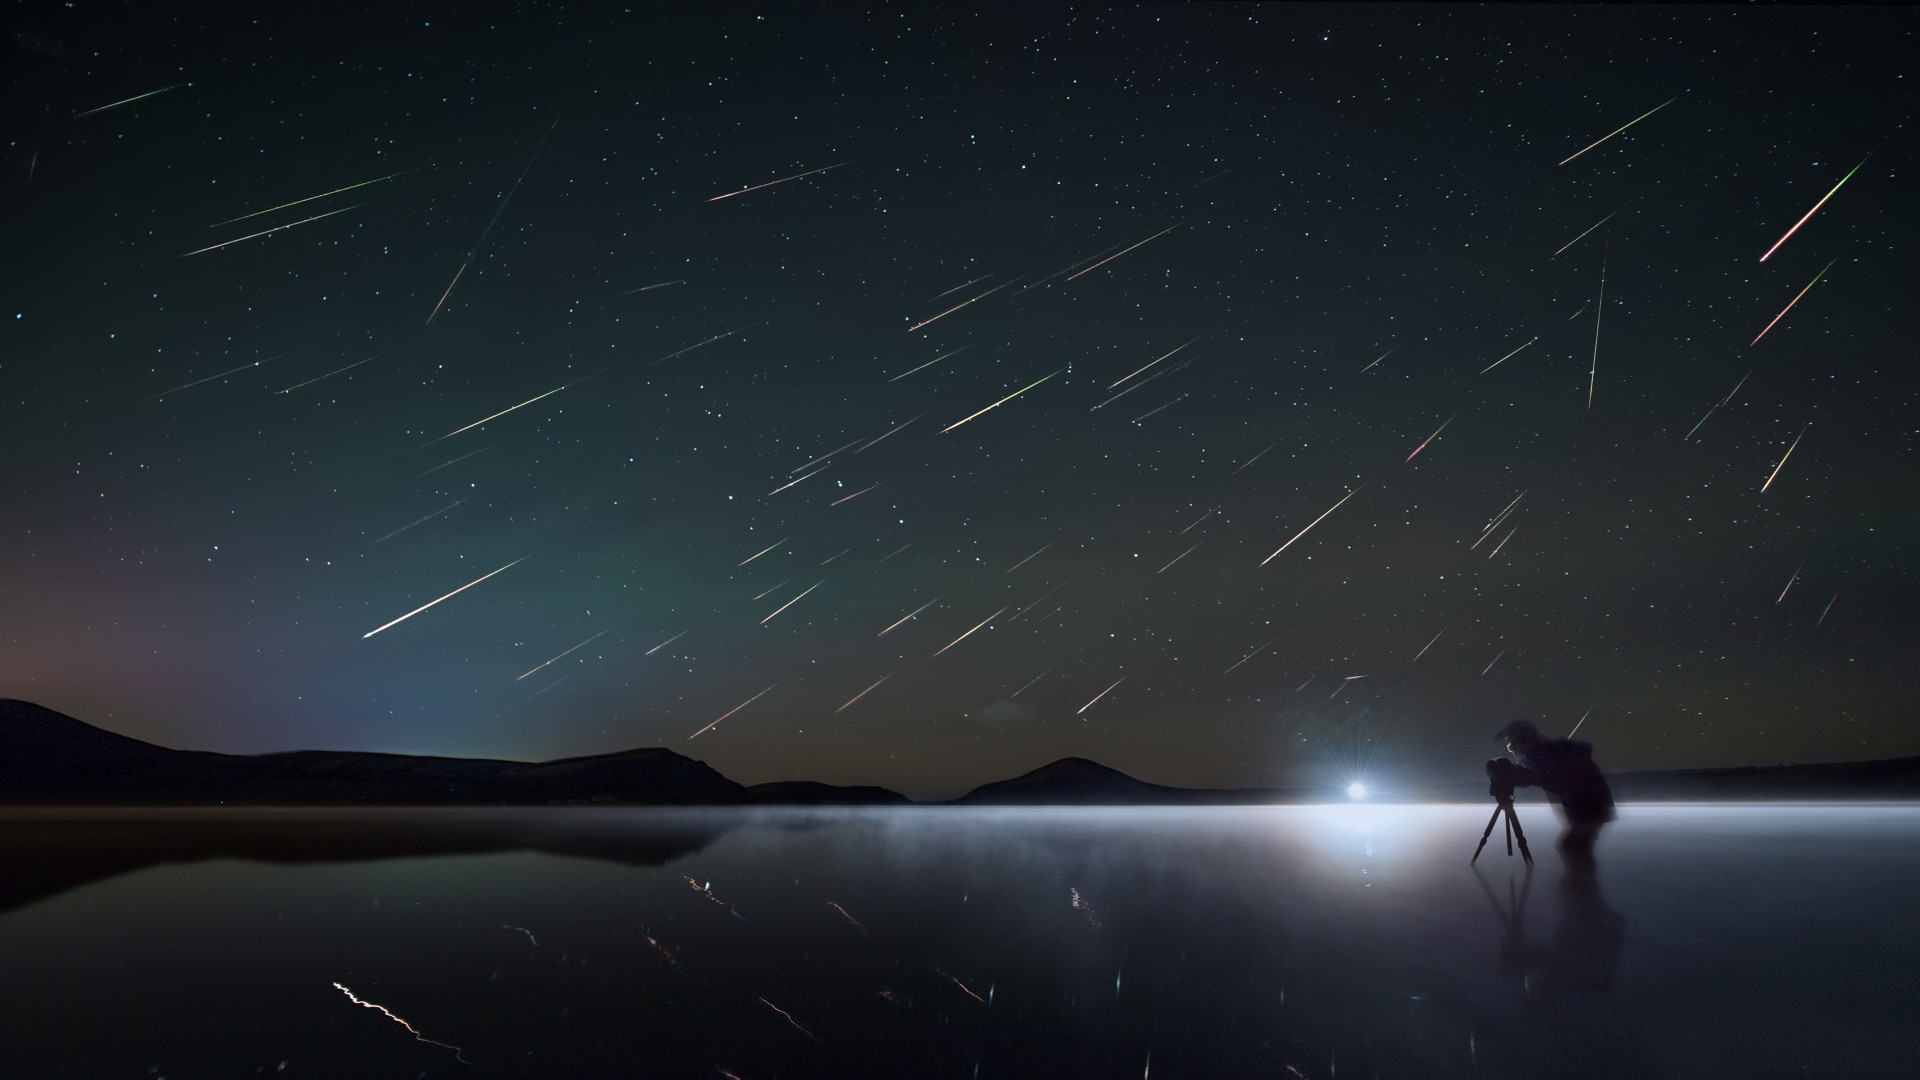 8 Facts About Perseid Meteor Shower